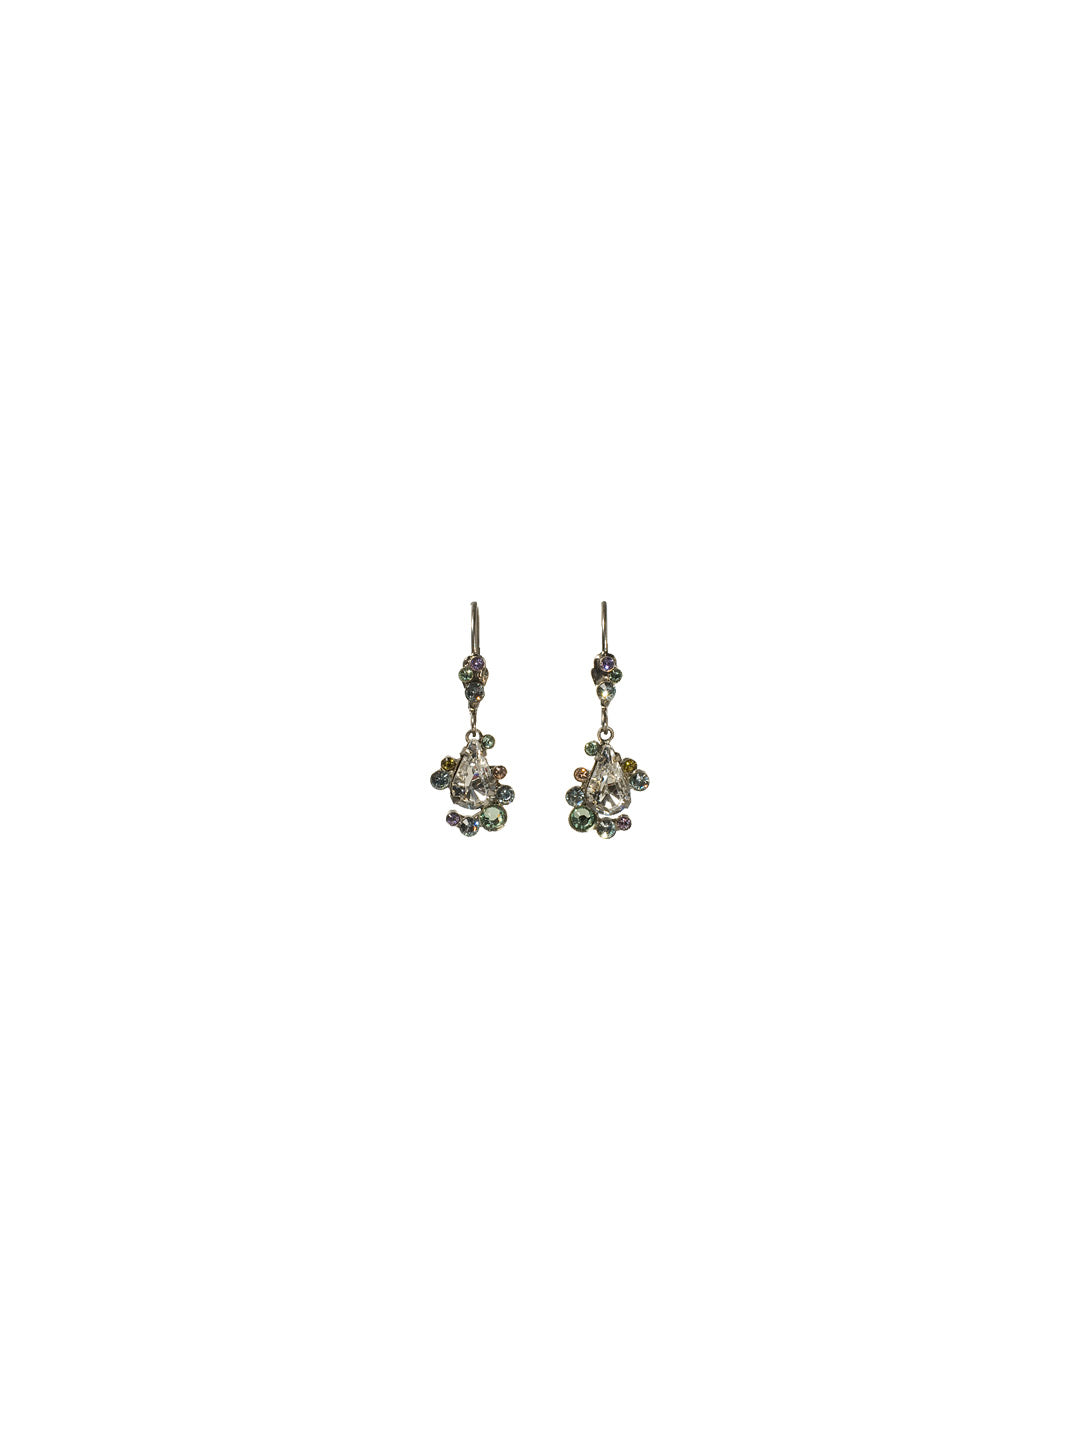 ECB38 Dangle Earrings - ECB38ASRW - <p>The ECB38 Earrings are a simple, yet galmorous look. From Sorrelli's Running Water collection in our Antique Silver-tone finish.</p>